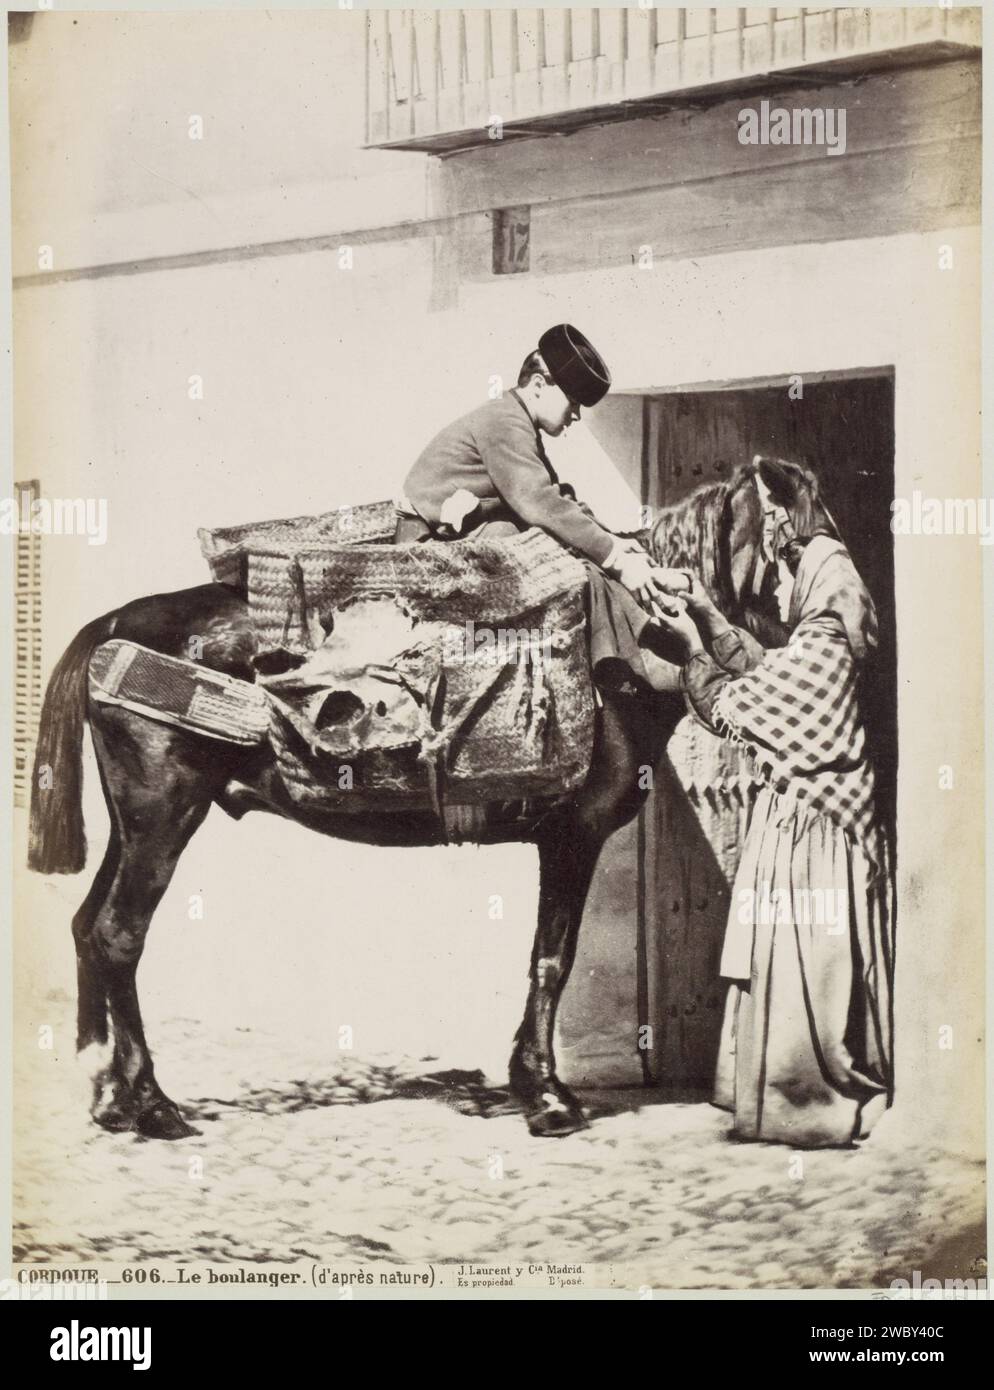 Woman buys bread from Bakker on horseback in Córdoba, Juan Laurent, c. 1857 - c. 1880 photograph Part of Reisalbum with photos of sights in Spain and Morocco. Córdoba cardboard. paper. photographic support albumen print street-trader. horse Córdoba Stock Photo